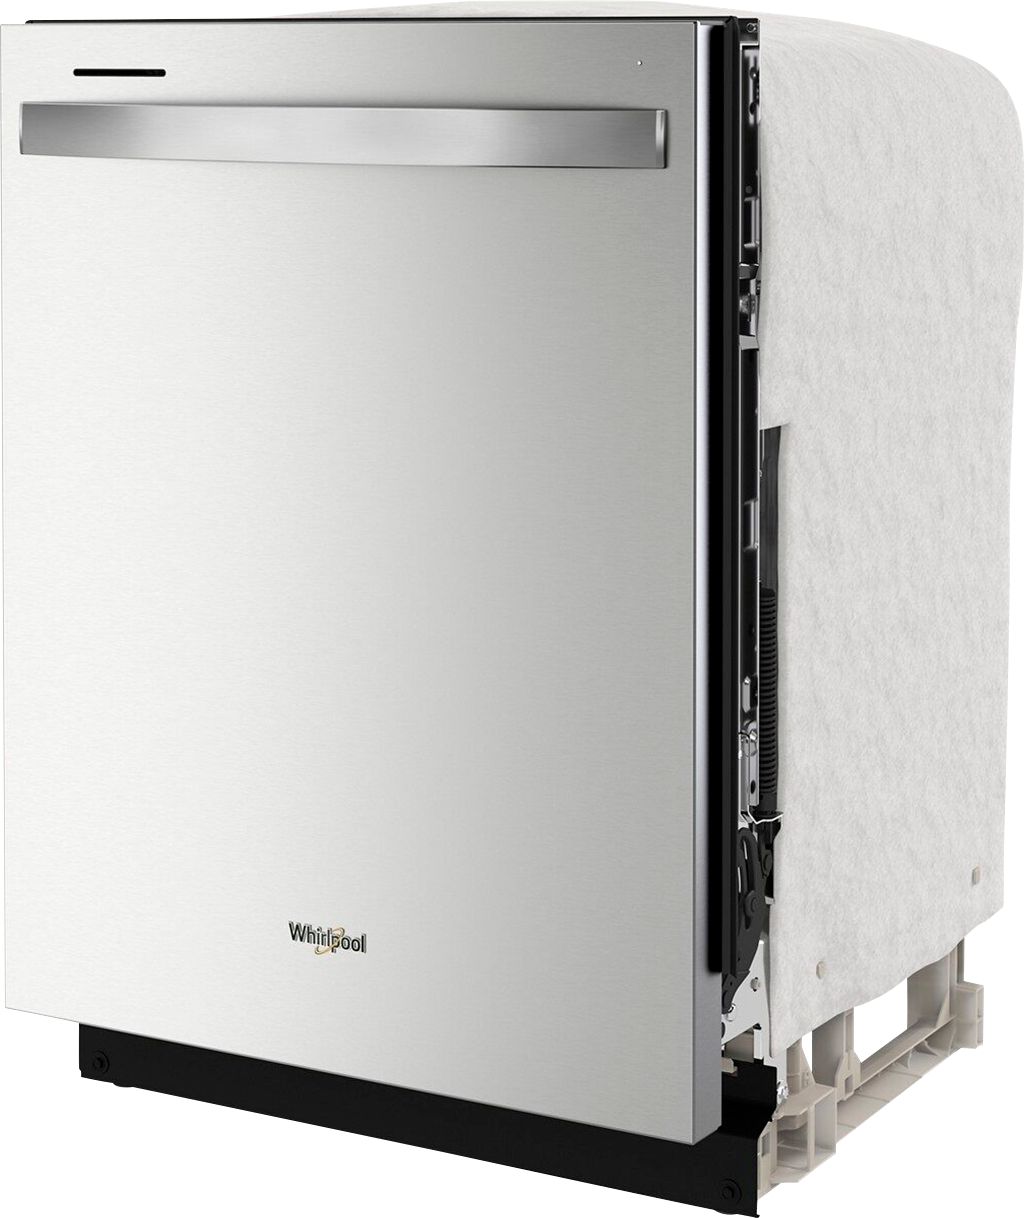 Angle View: Whirlpool - 24" Built-In Dishwasher - Black stainless steel